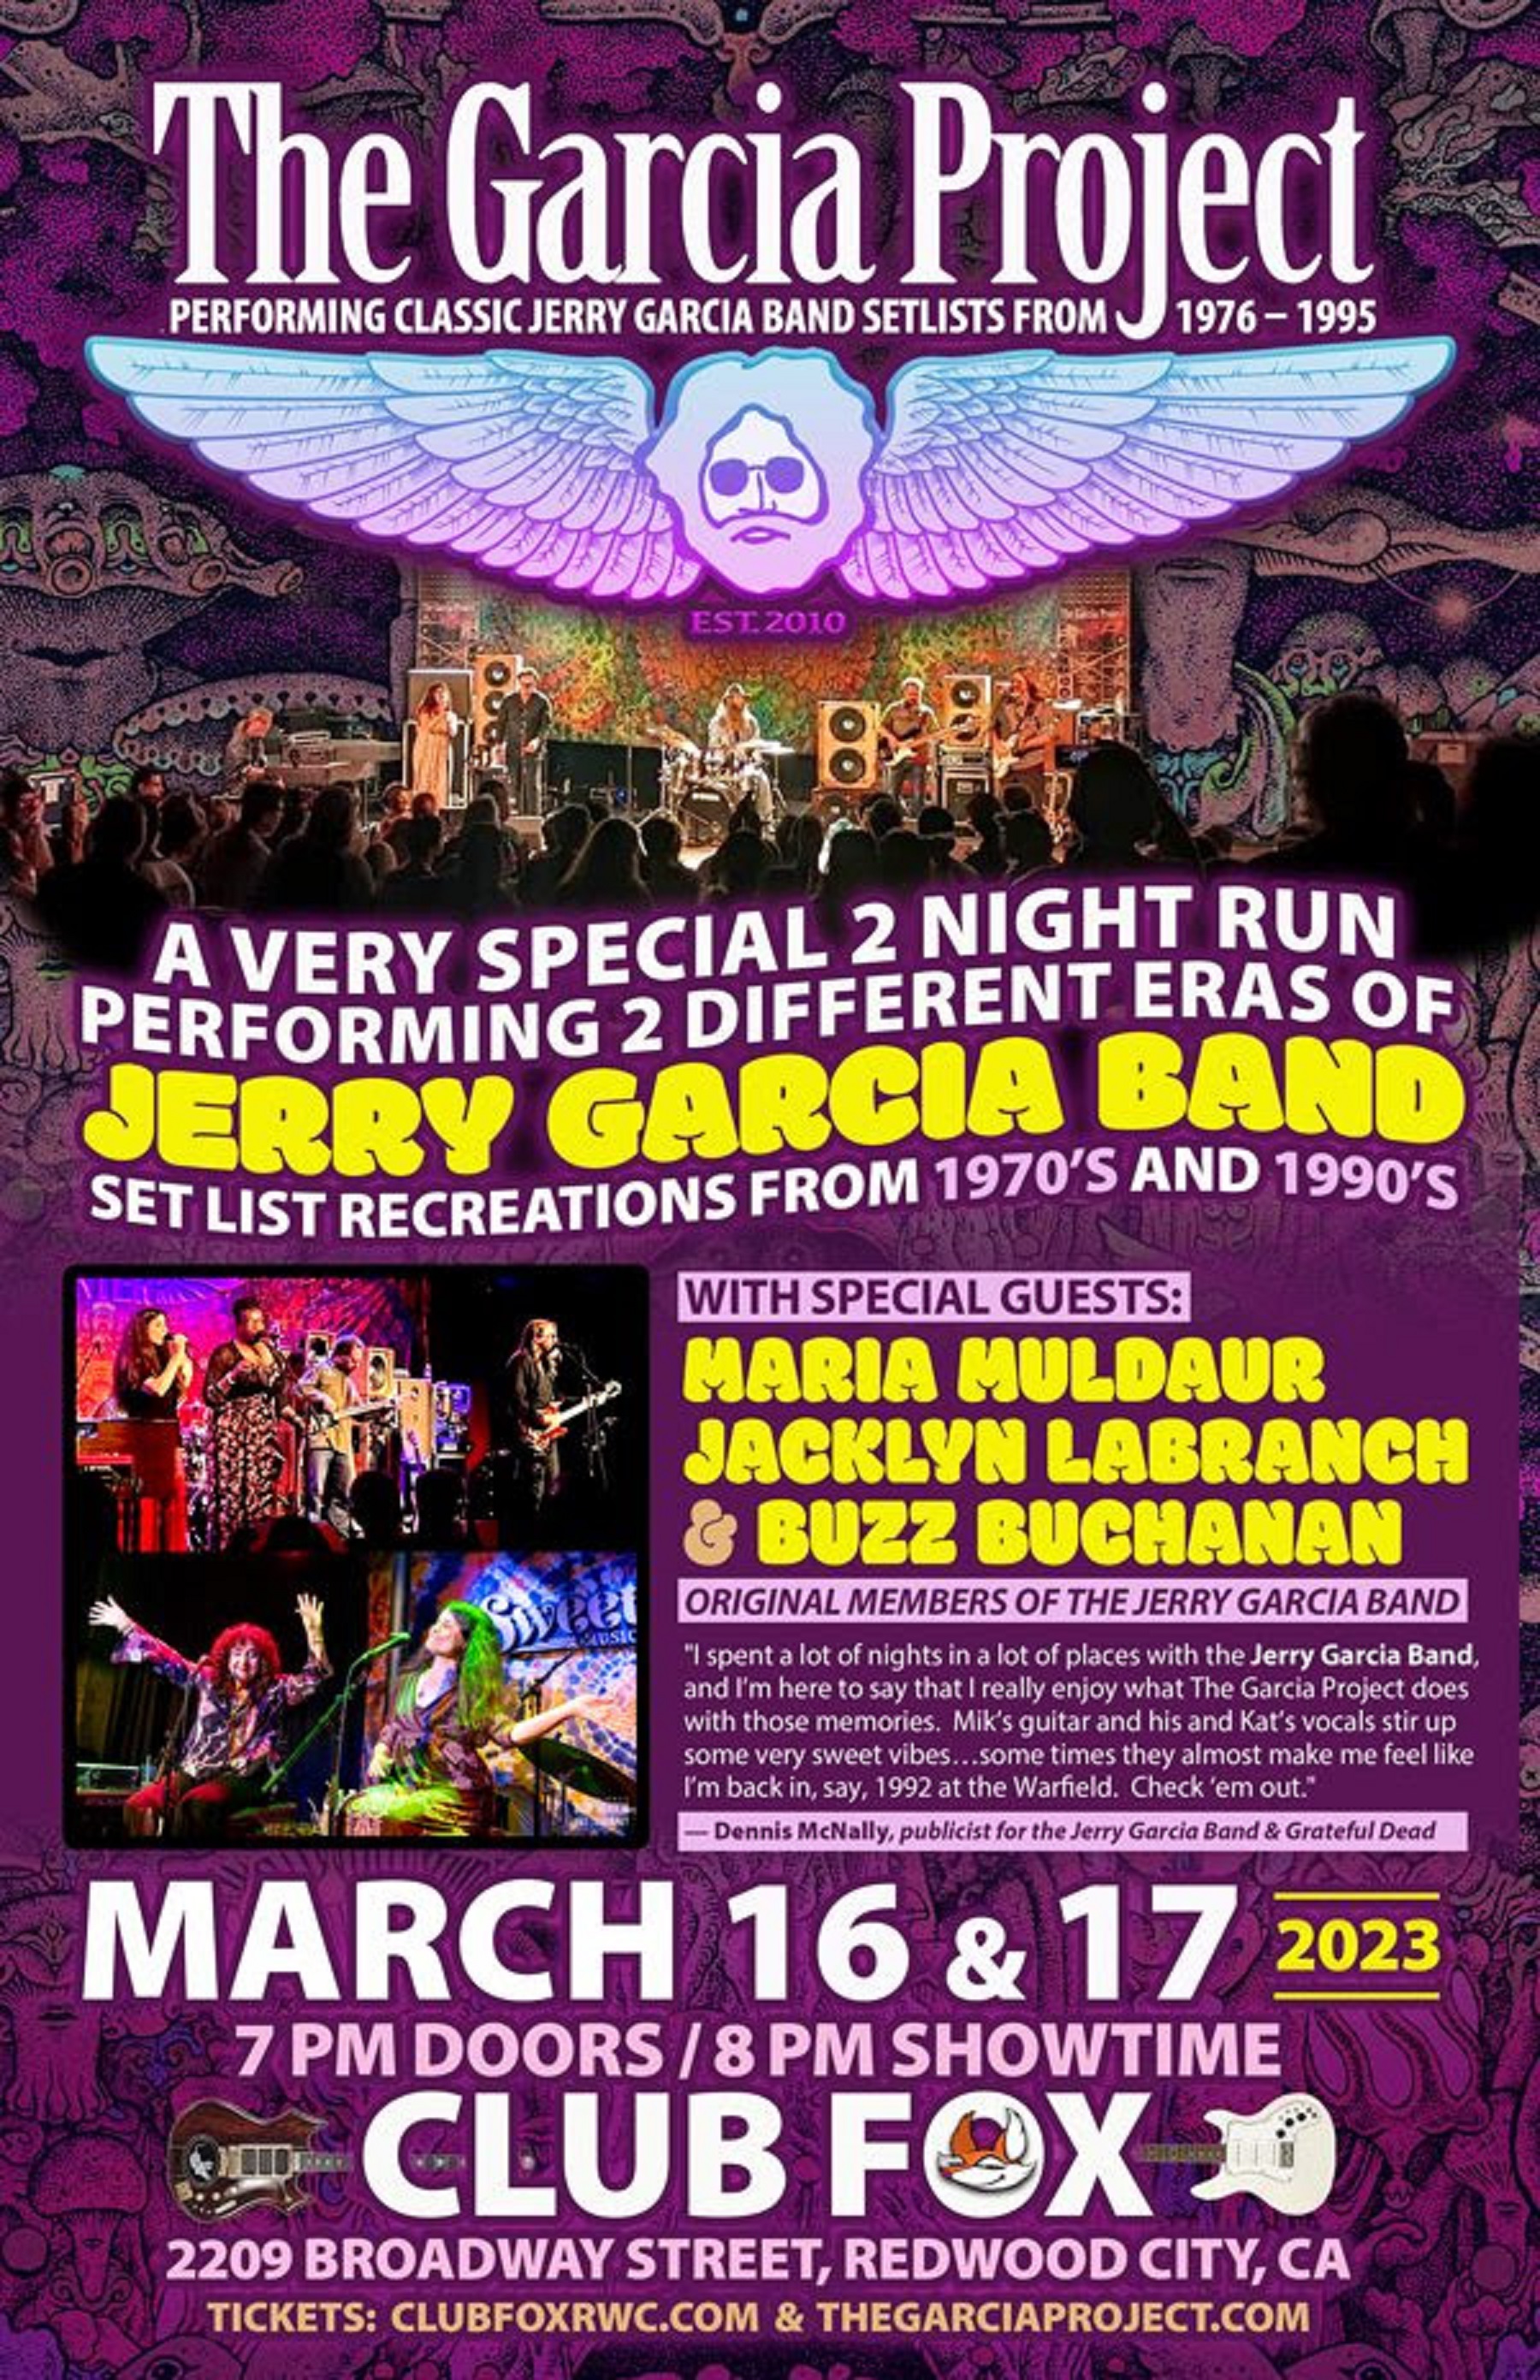 The Garcia Project returns to California in 2023 with SPECIAL GUESTS!